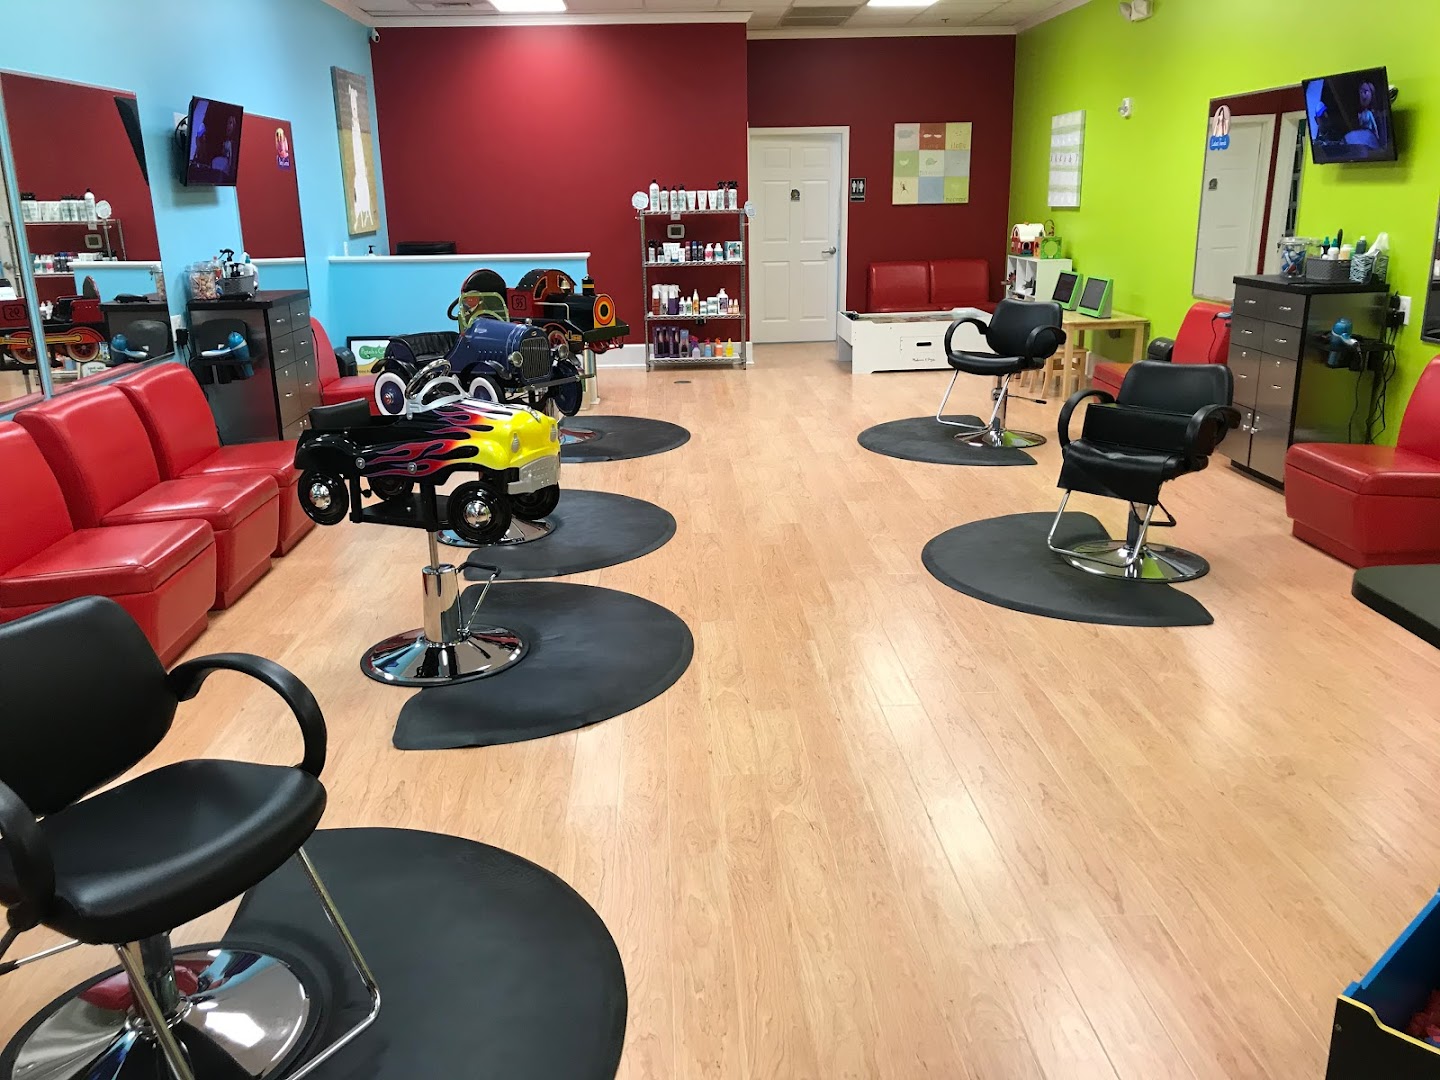 Pigtails & Crewcuts: Haircuts for Kids - Charlotte - Cotswold, NC